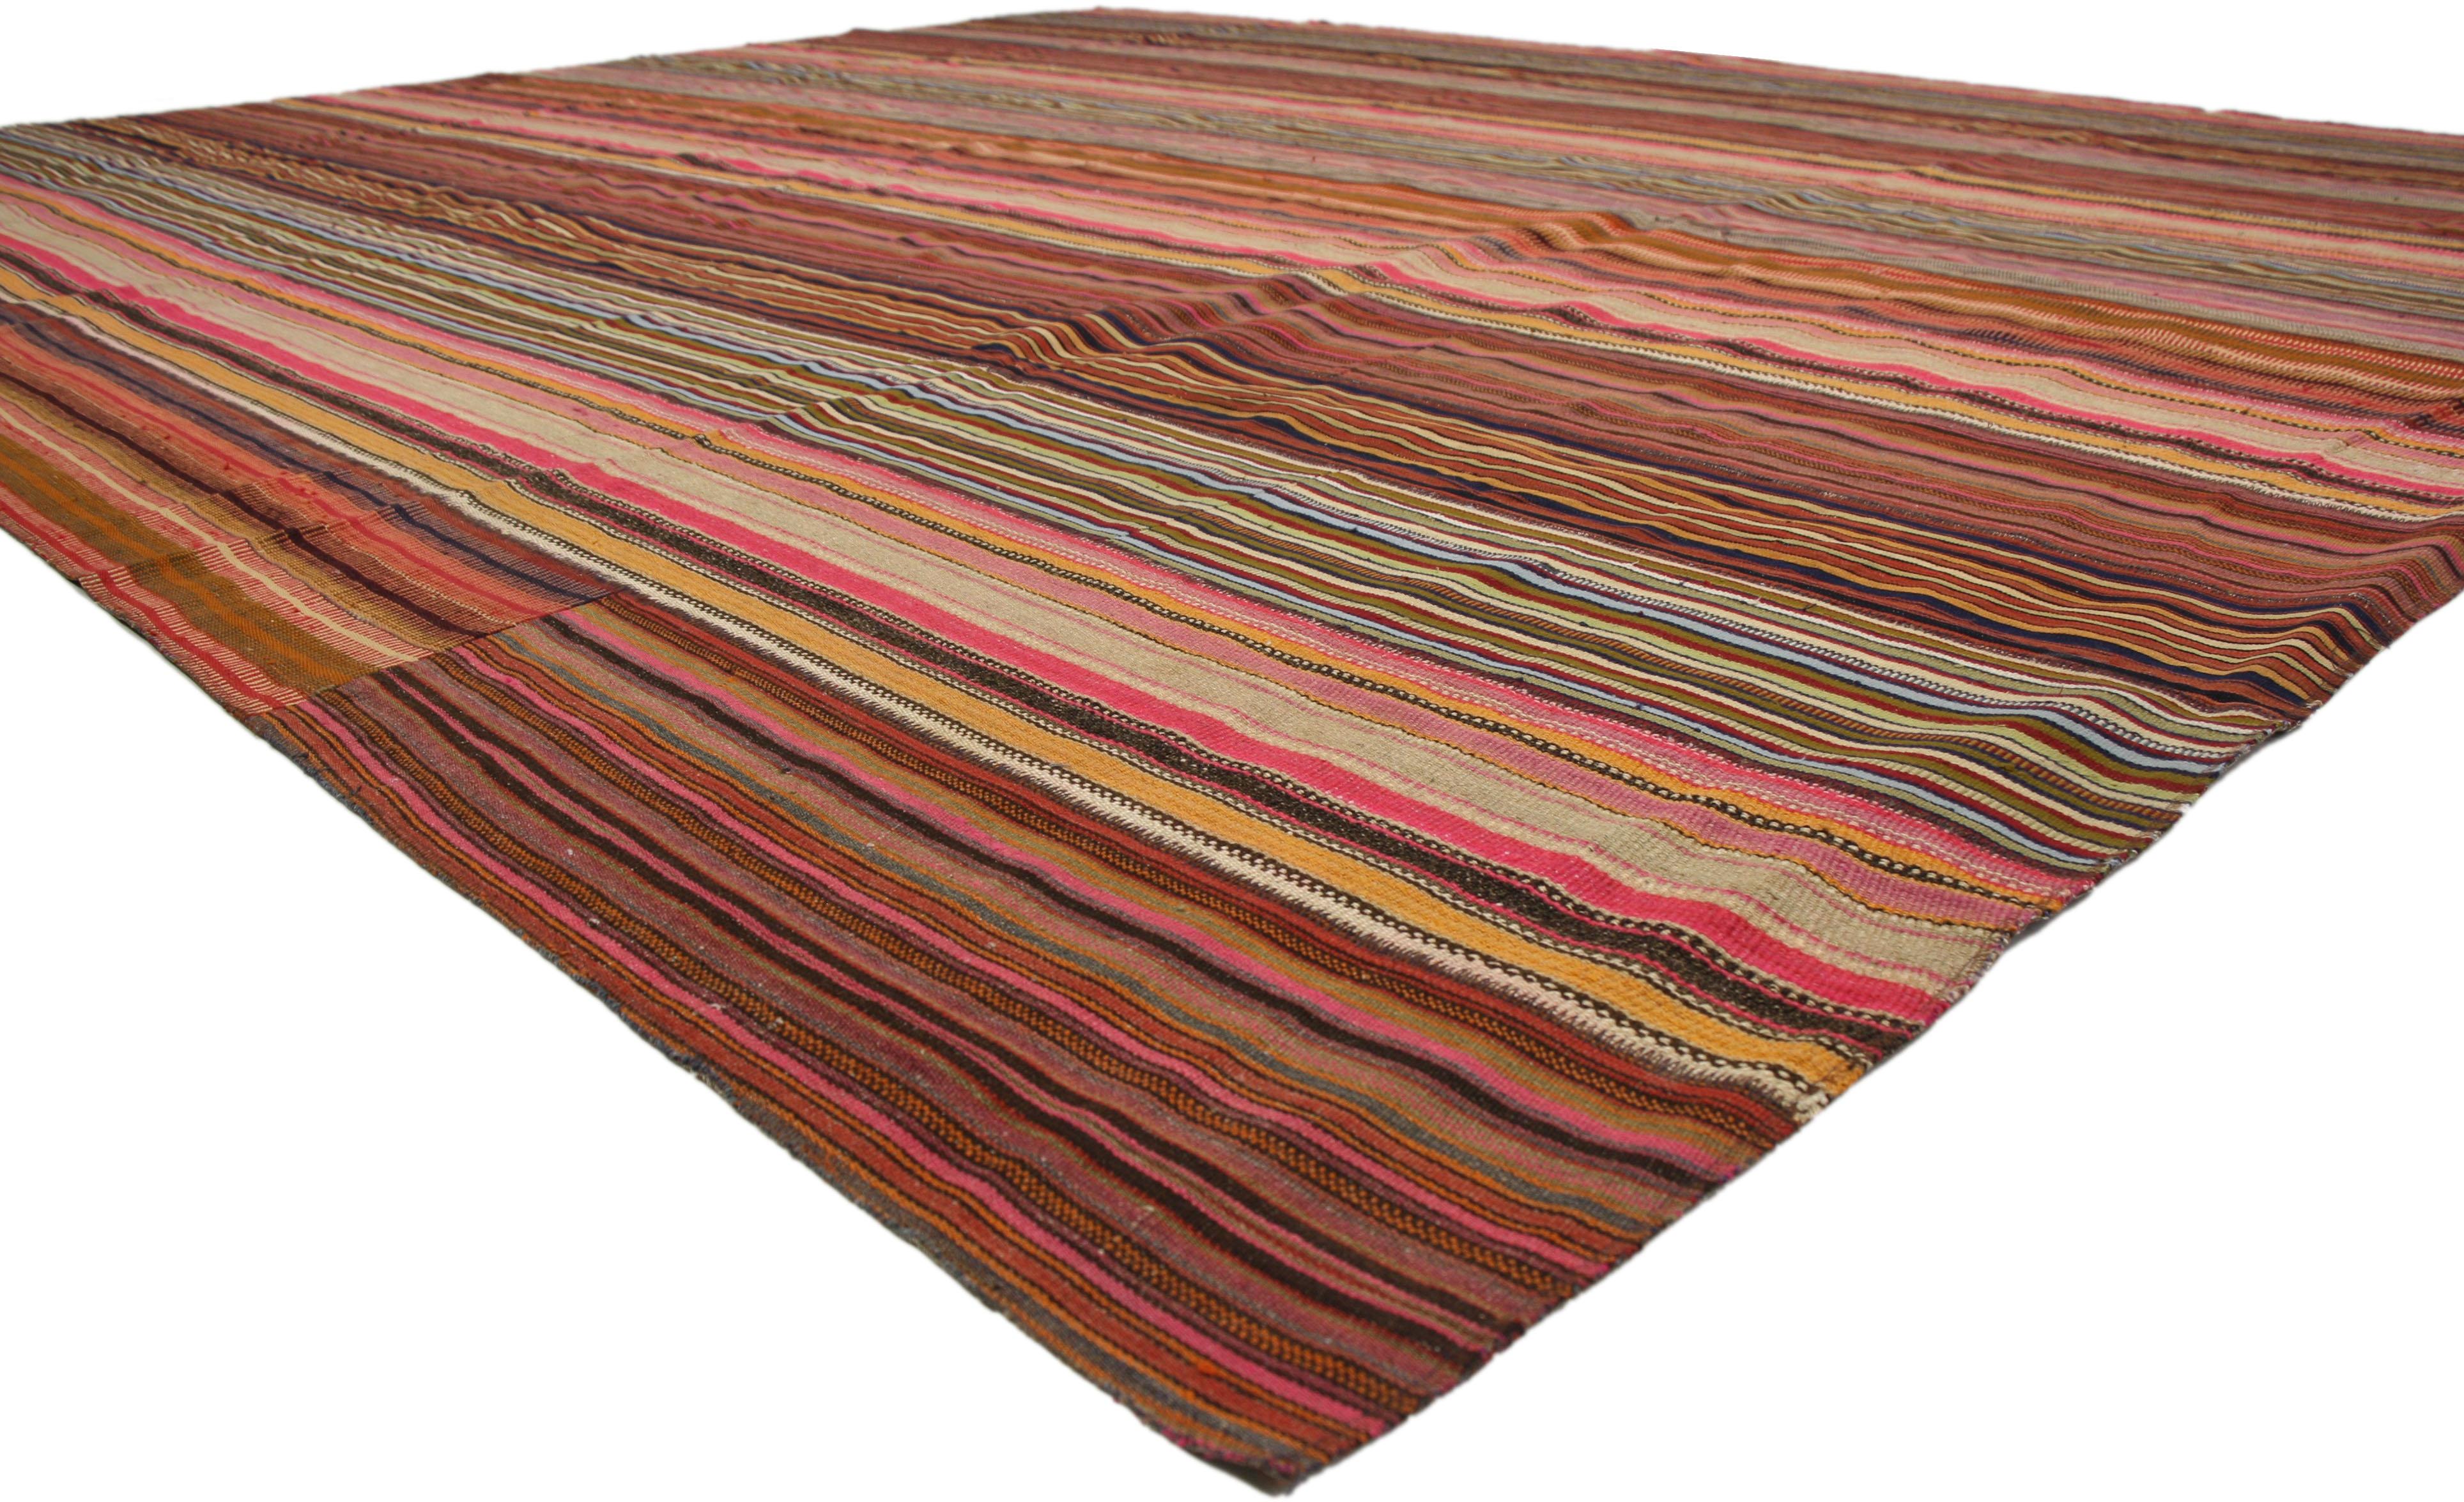 20th Century Vintage Turkish Striped Kilim Rug with Modern Rustic Cabin Style For Sale